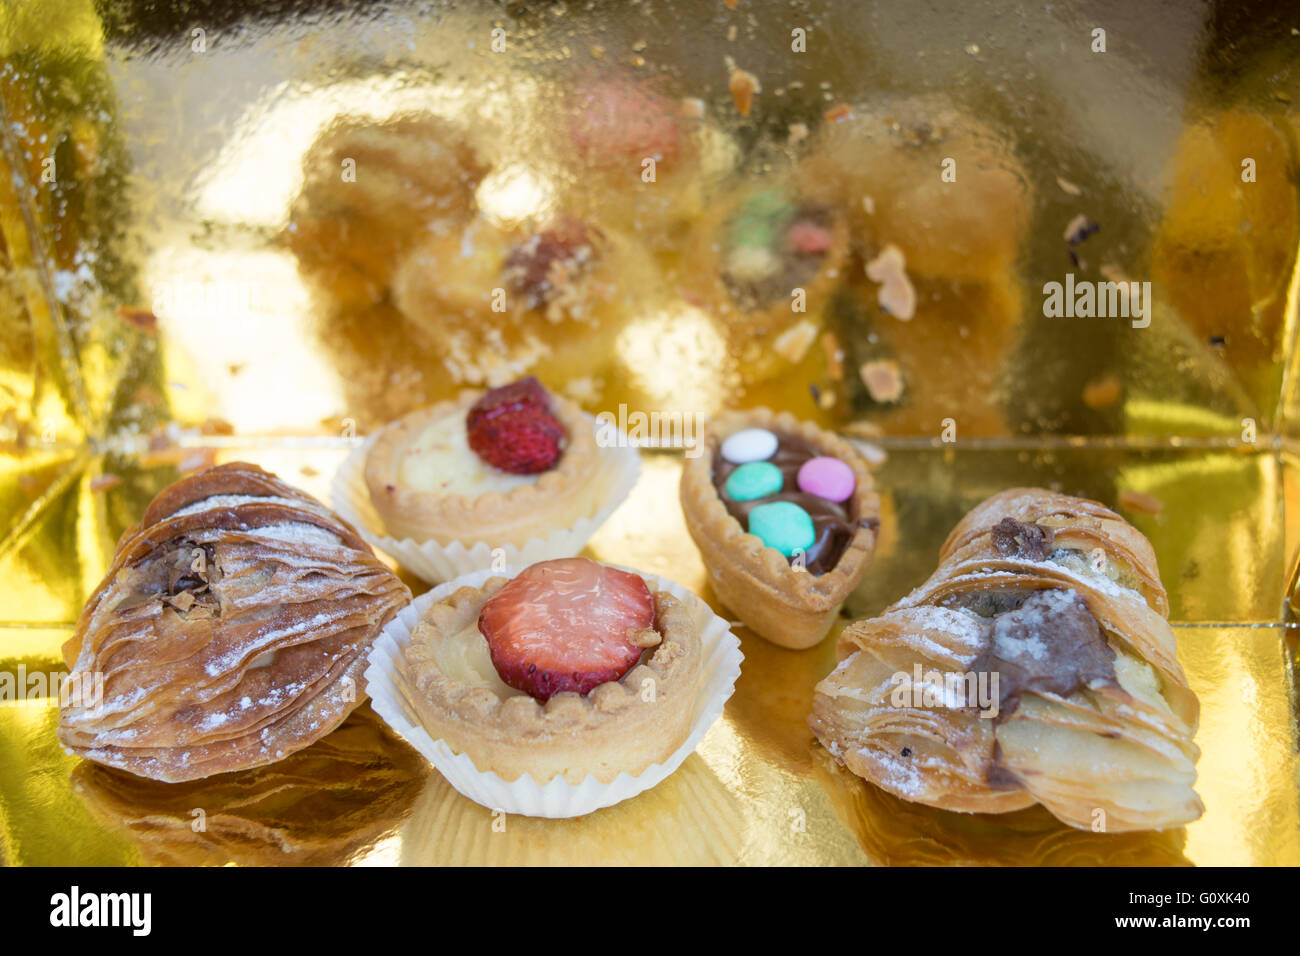 assortment of pastries stuffed with cream or chocolate or also with fresh fruit Stock Photo